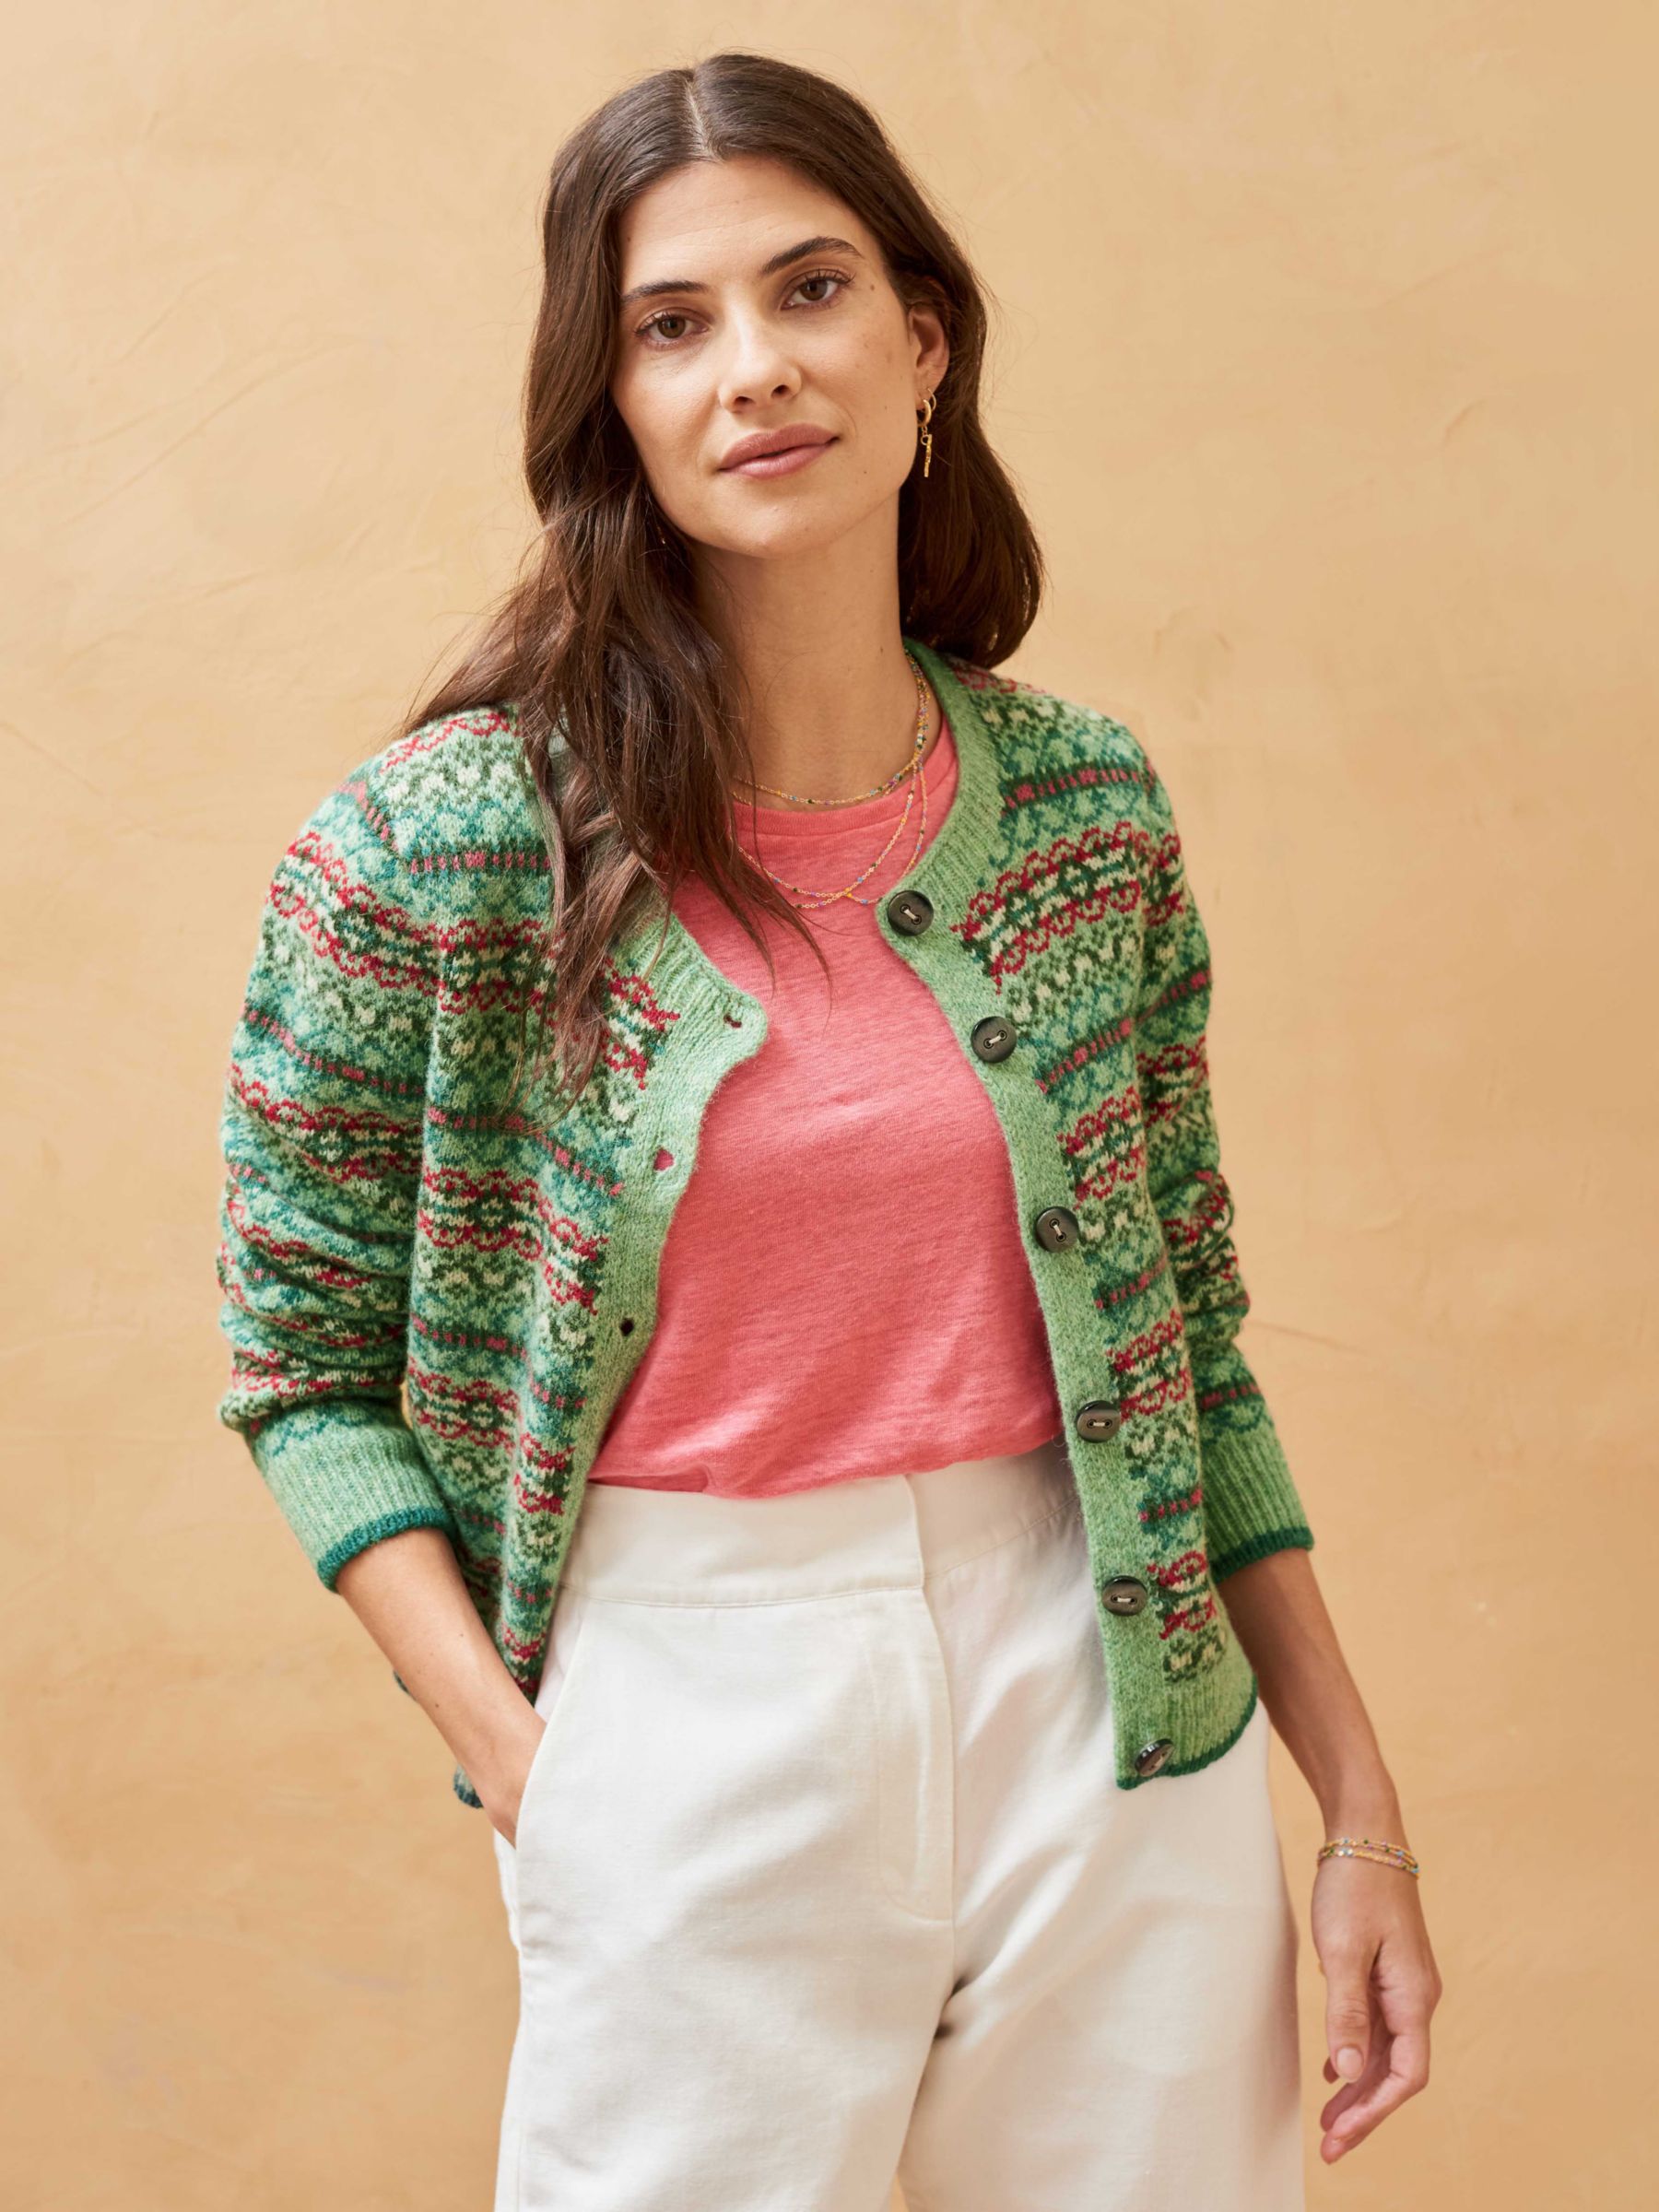 J.Crew: Cashmere Fair Isle Cardigan Sweater With Jewel Buttons For Women